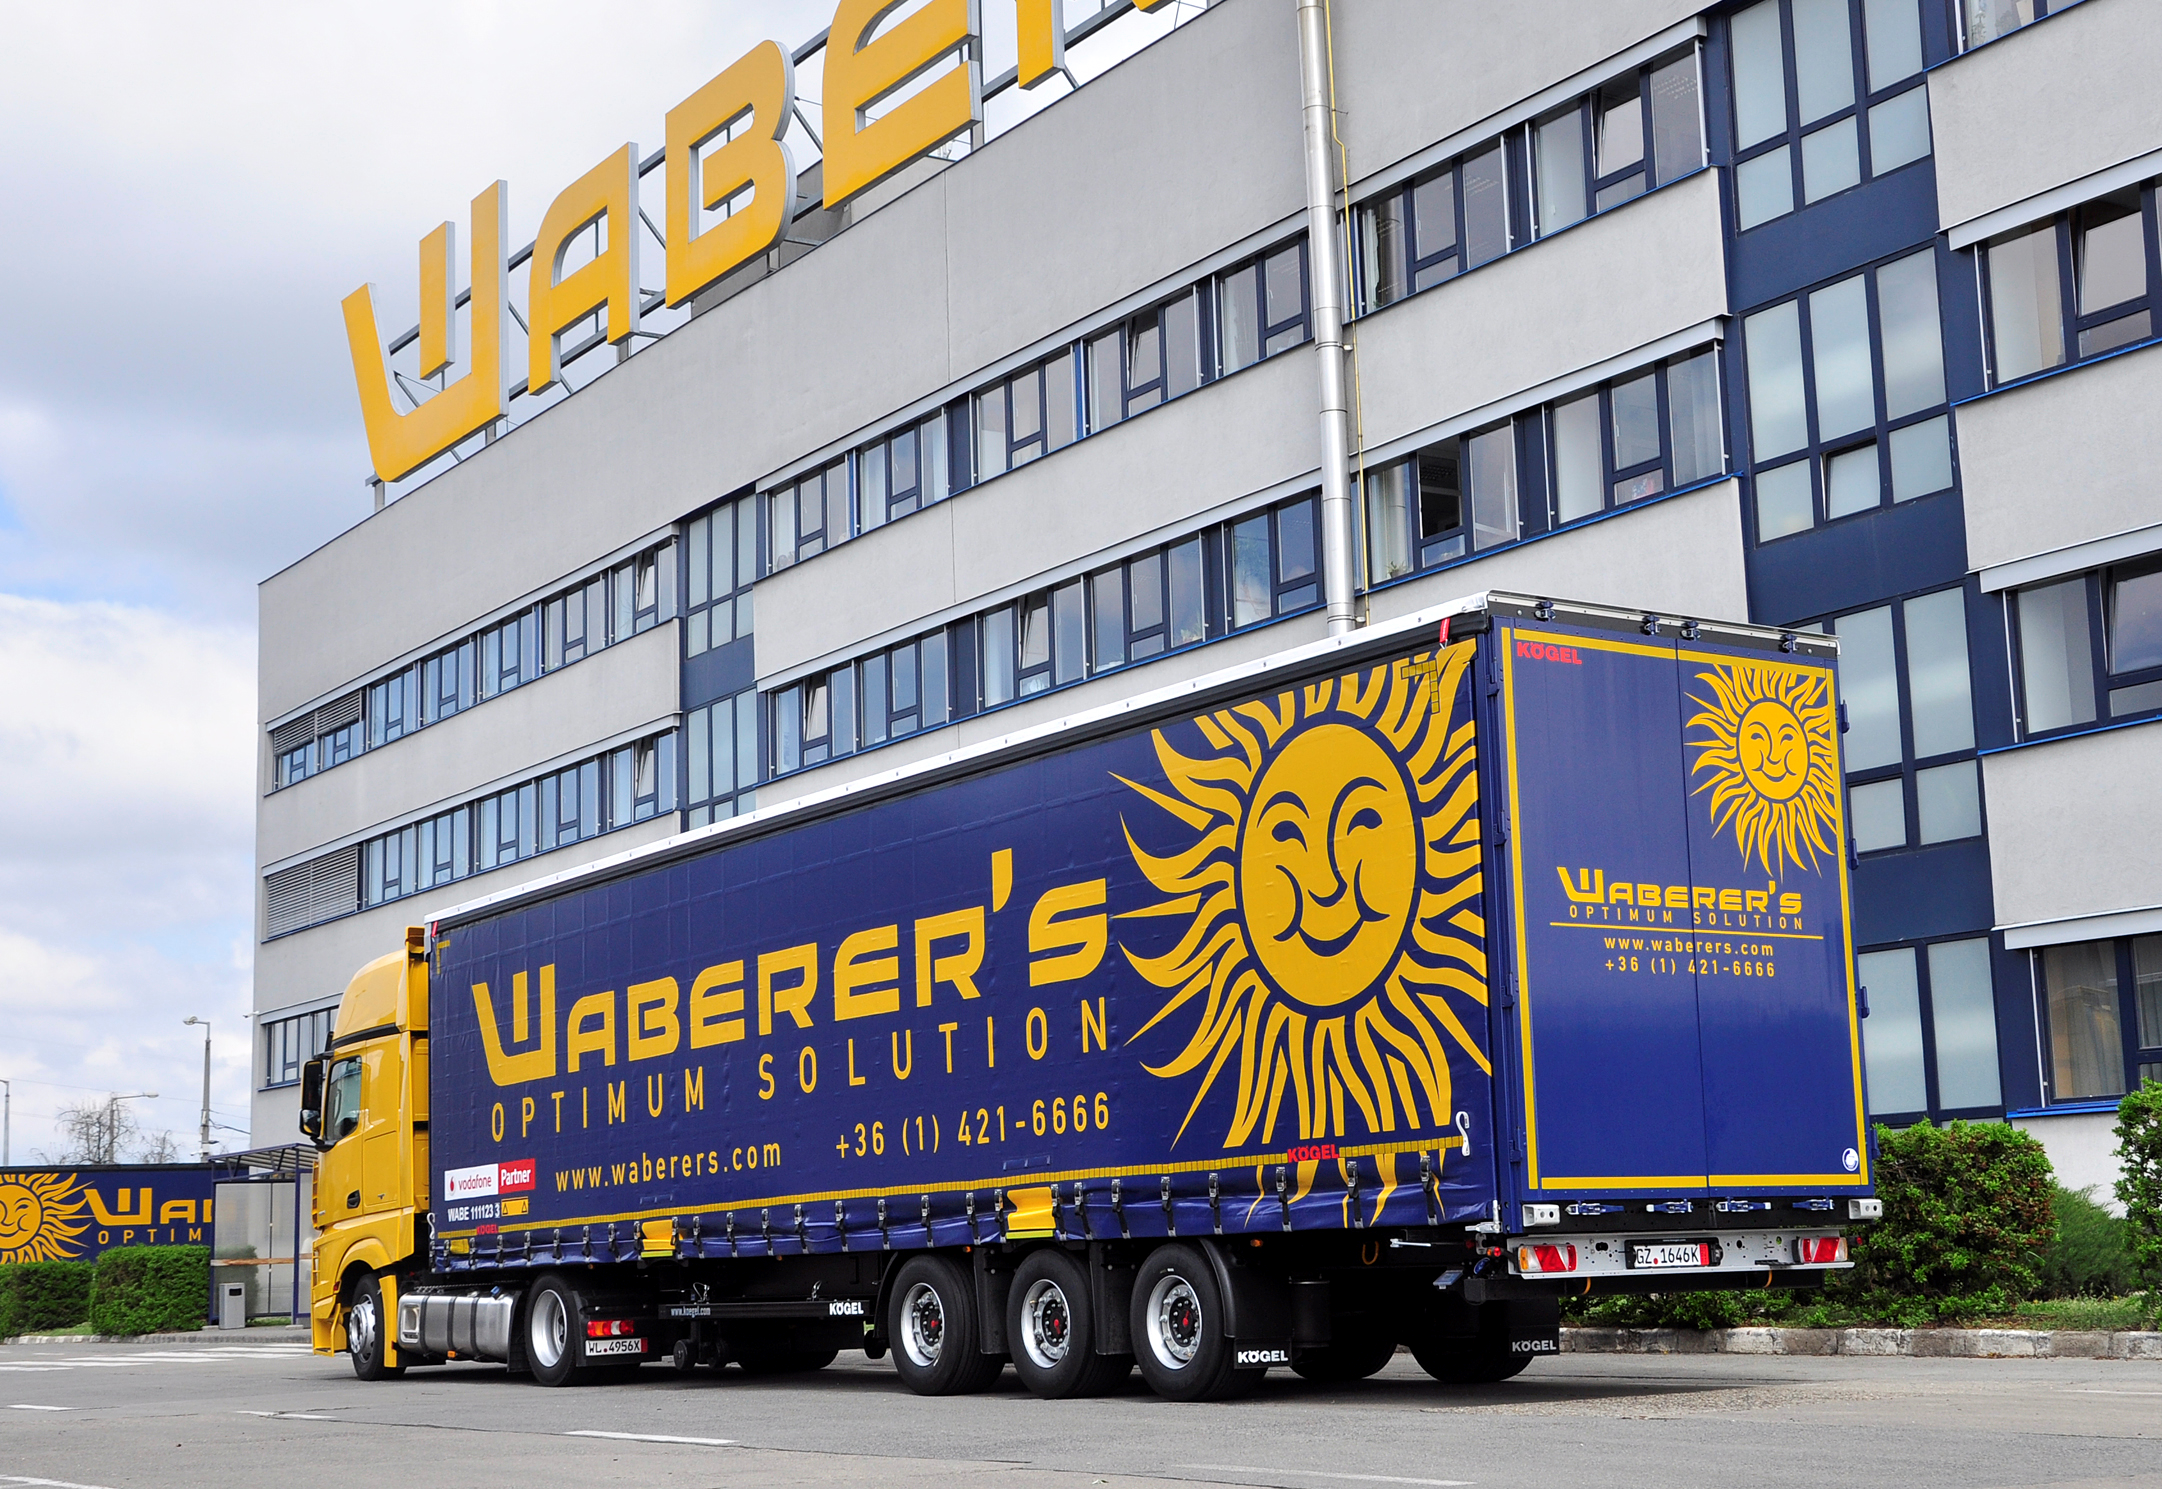 Waberer’s results exceeding expectations in 2017